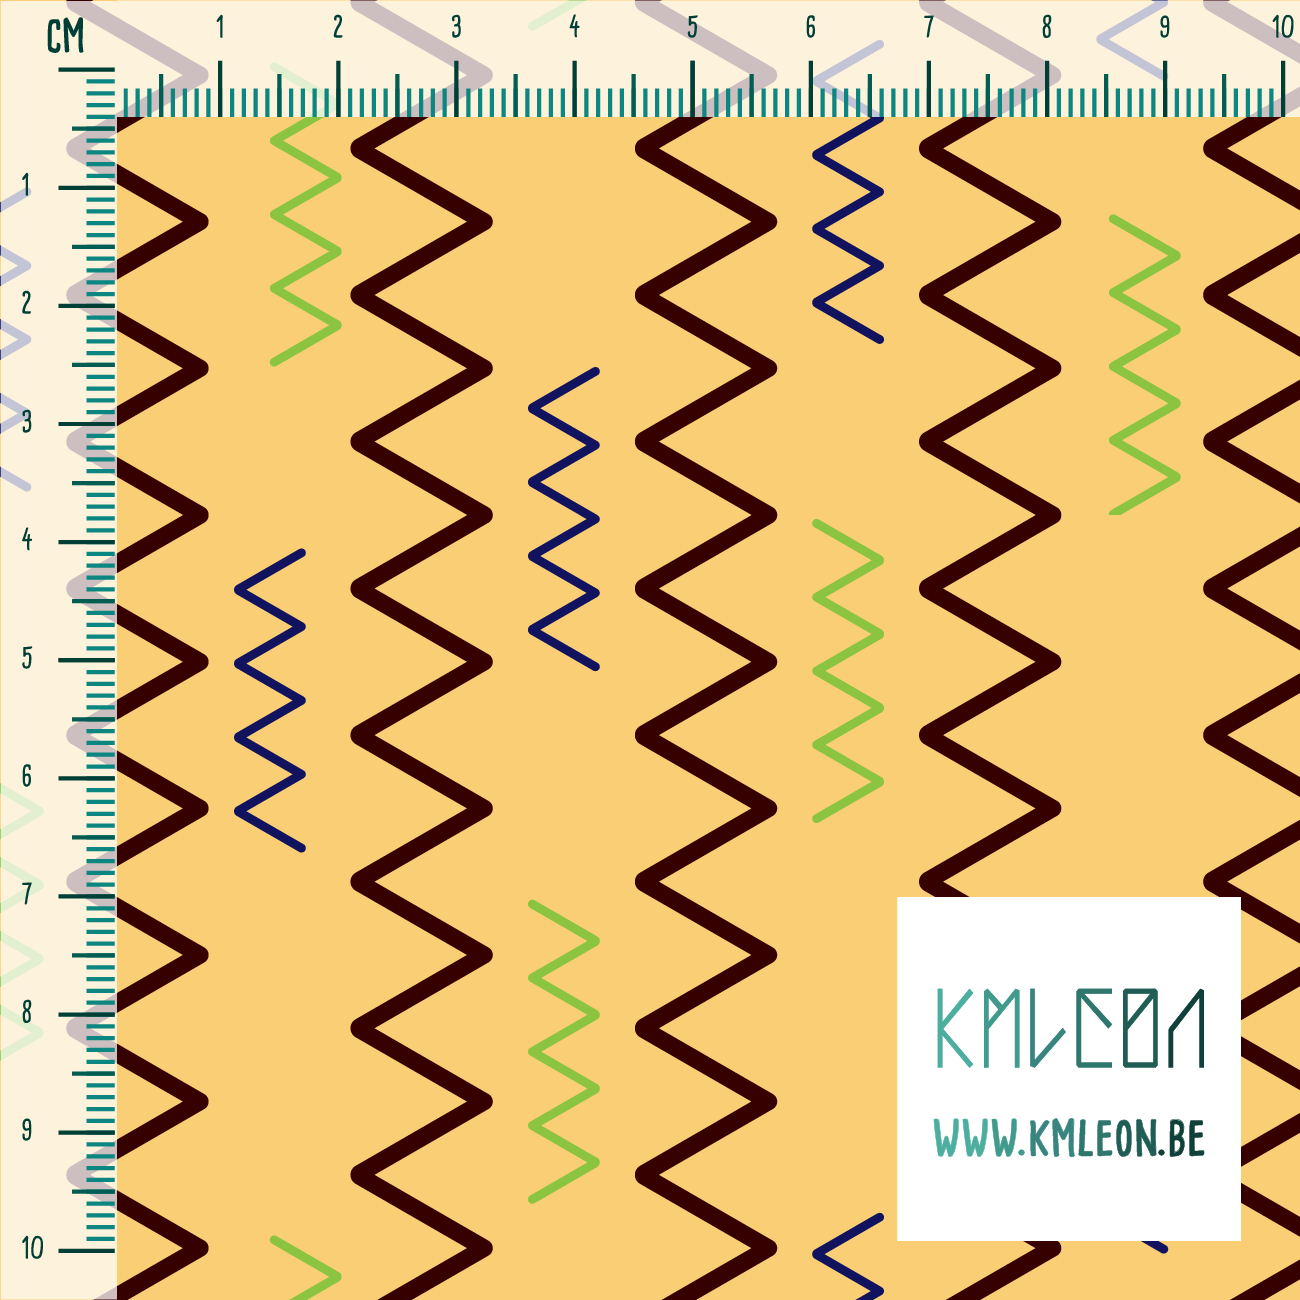 Brown, blue and green zig zag fabric